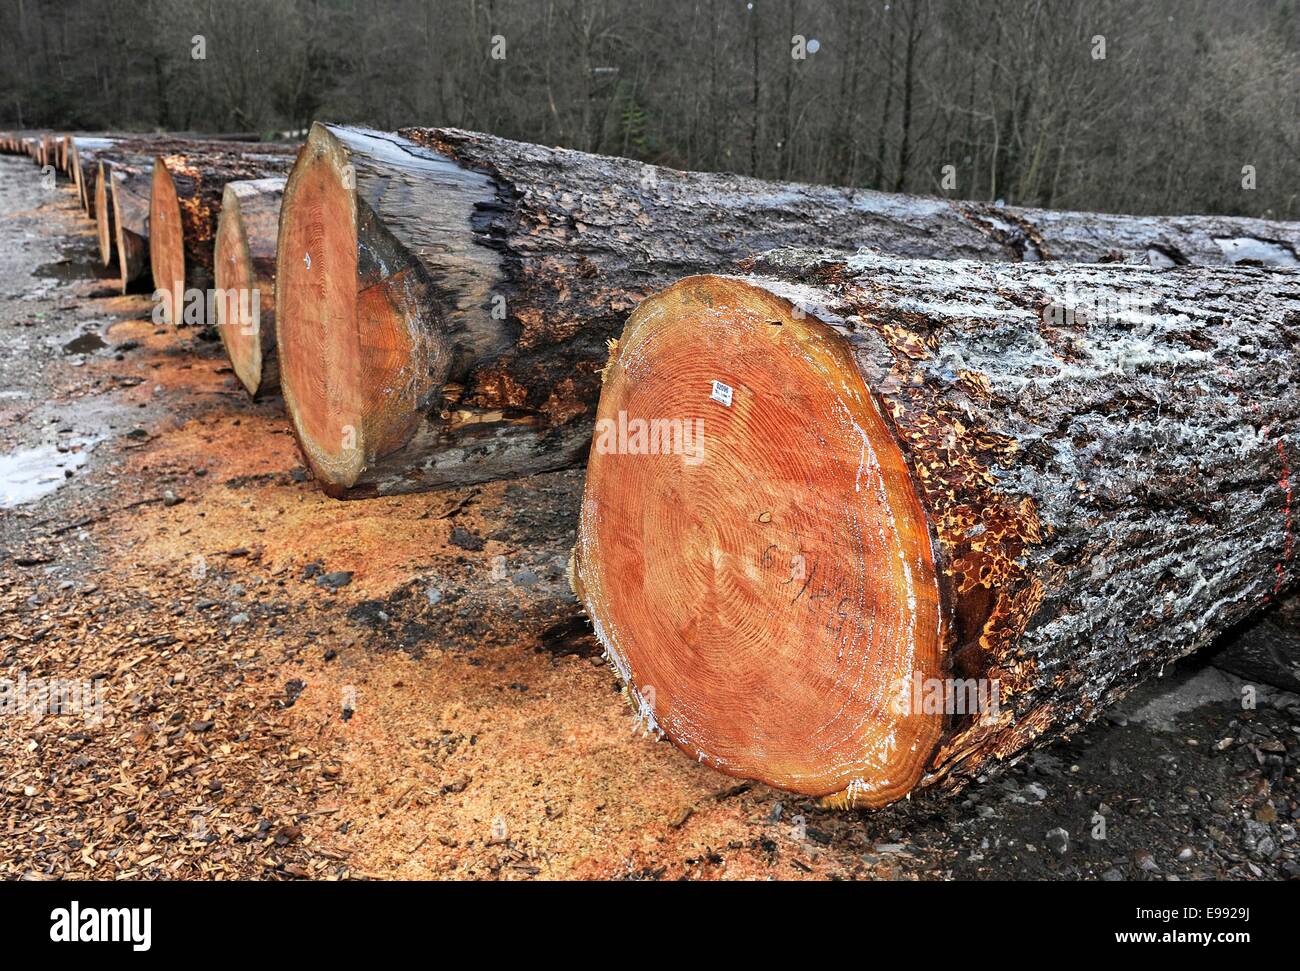 View of a r wood yard in the Black Forest near the mountain Belchen, southern Germany, on Dec.,16., 2011. Stock Photo